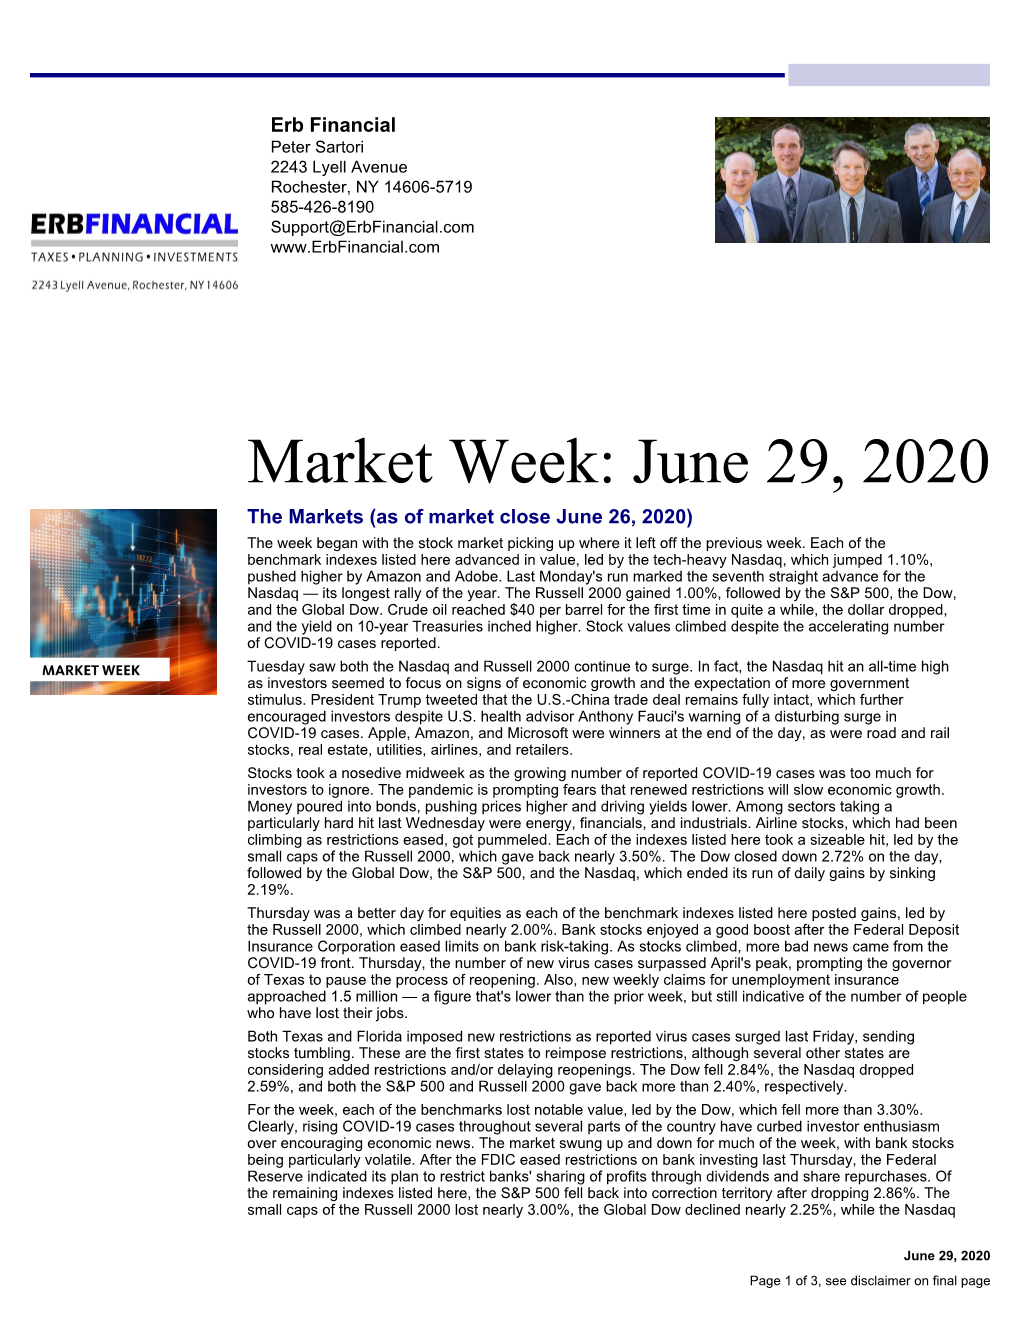 Market Week: June 29, 2020 the Markets (As of Market Close June 26, 2020) the Week Began with the Stock Market Picking up Where It Left Off the Previous Week